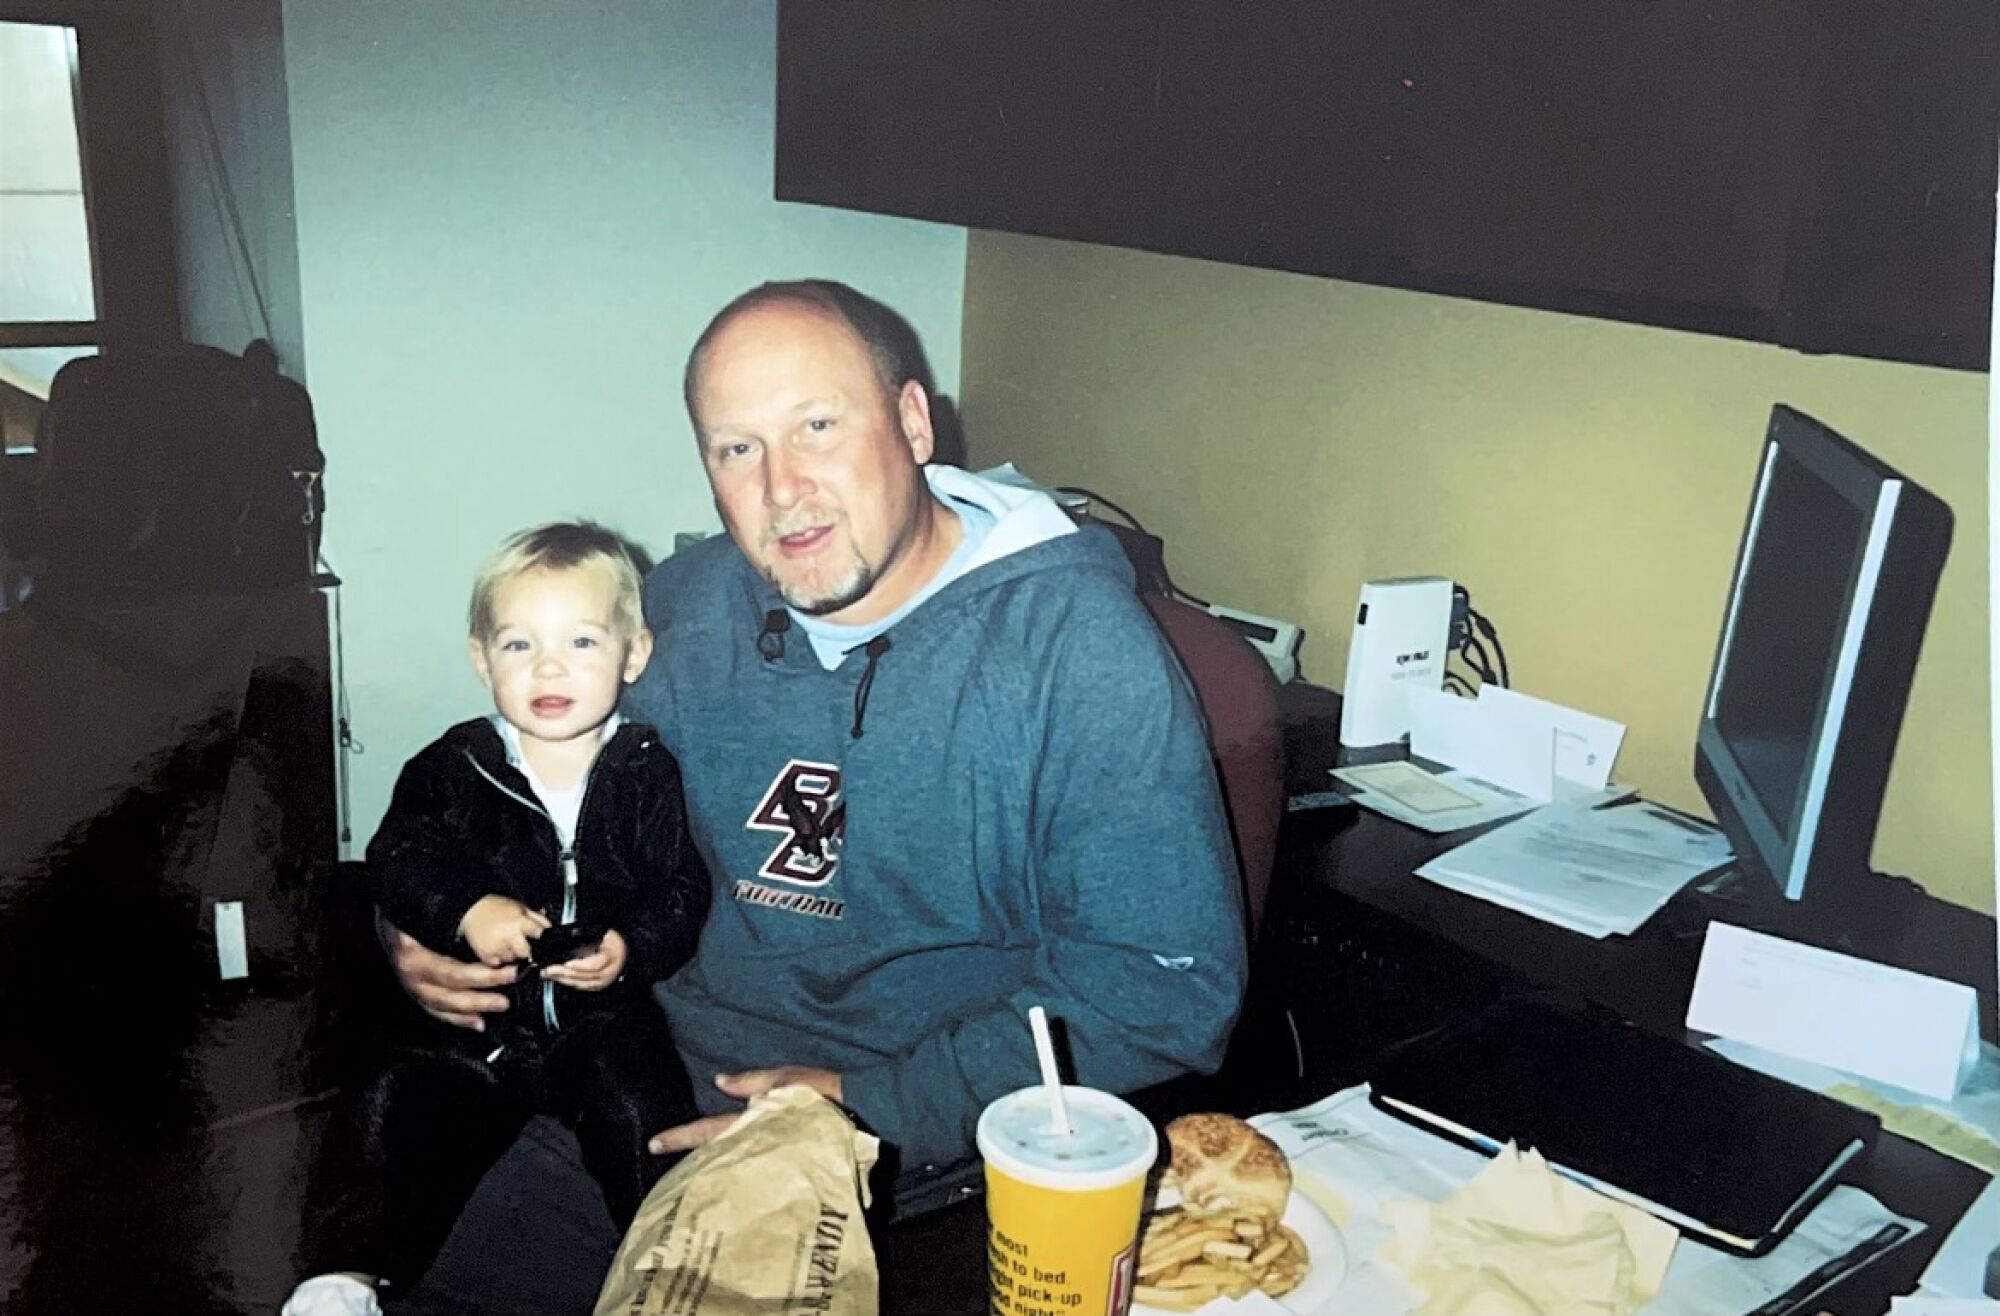 Bill McGovern during his days at Boston College with a very young Mackenzie McGovern on his lap.